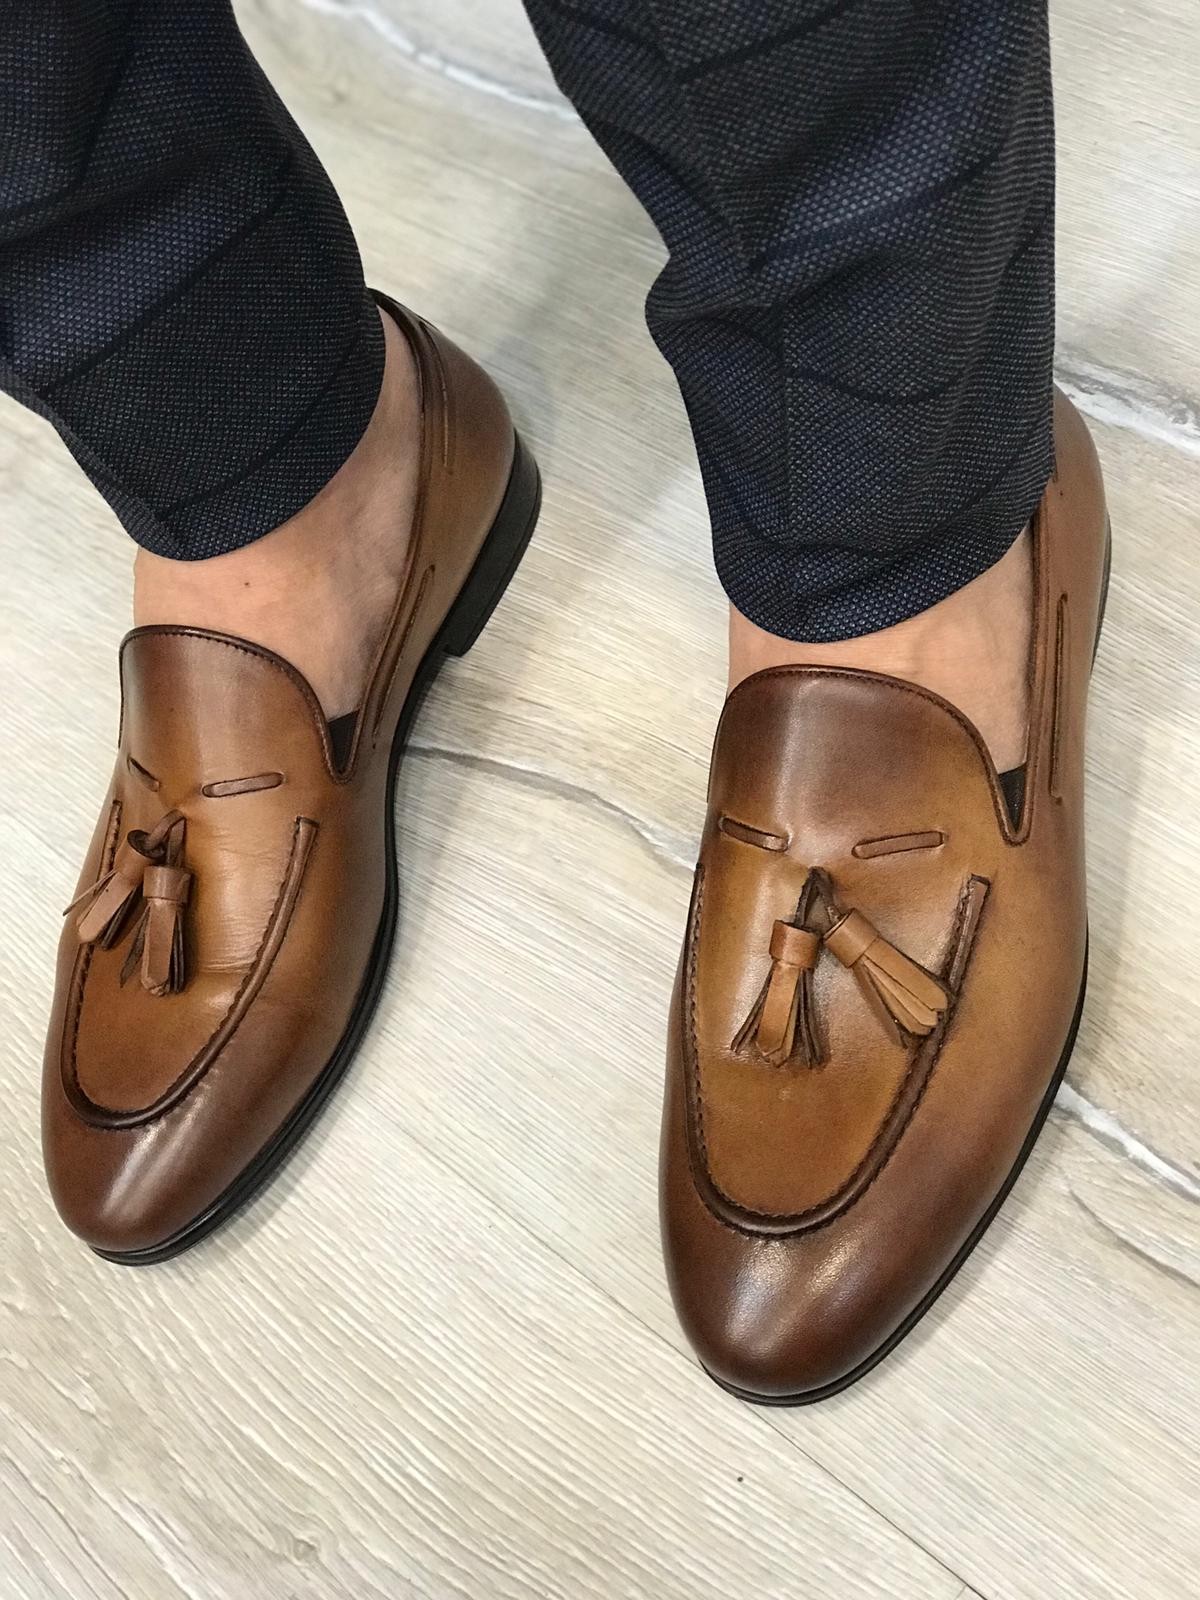 Buy Taba Tassel Loafer by Gentwith.com with Free Shipping